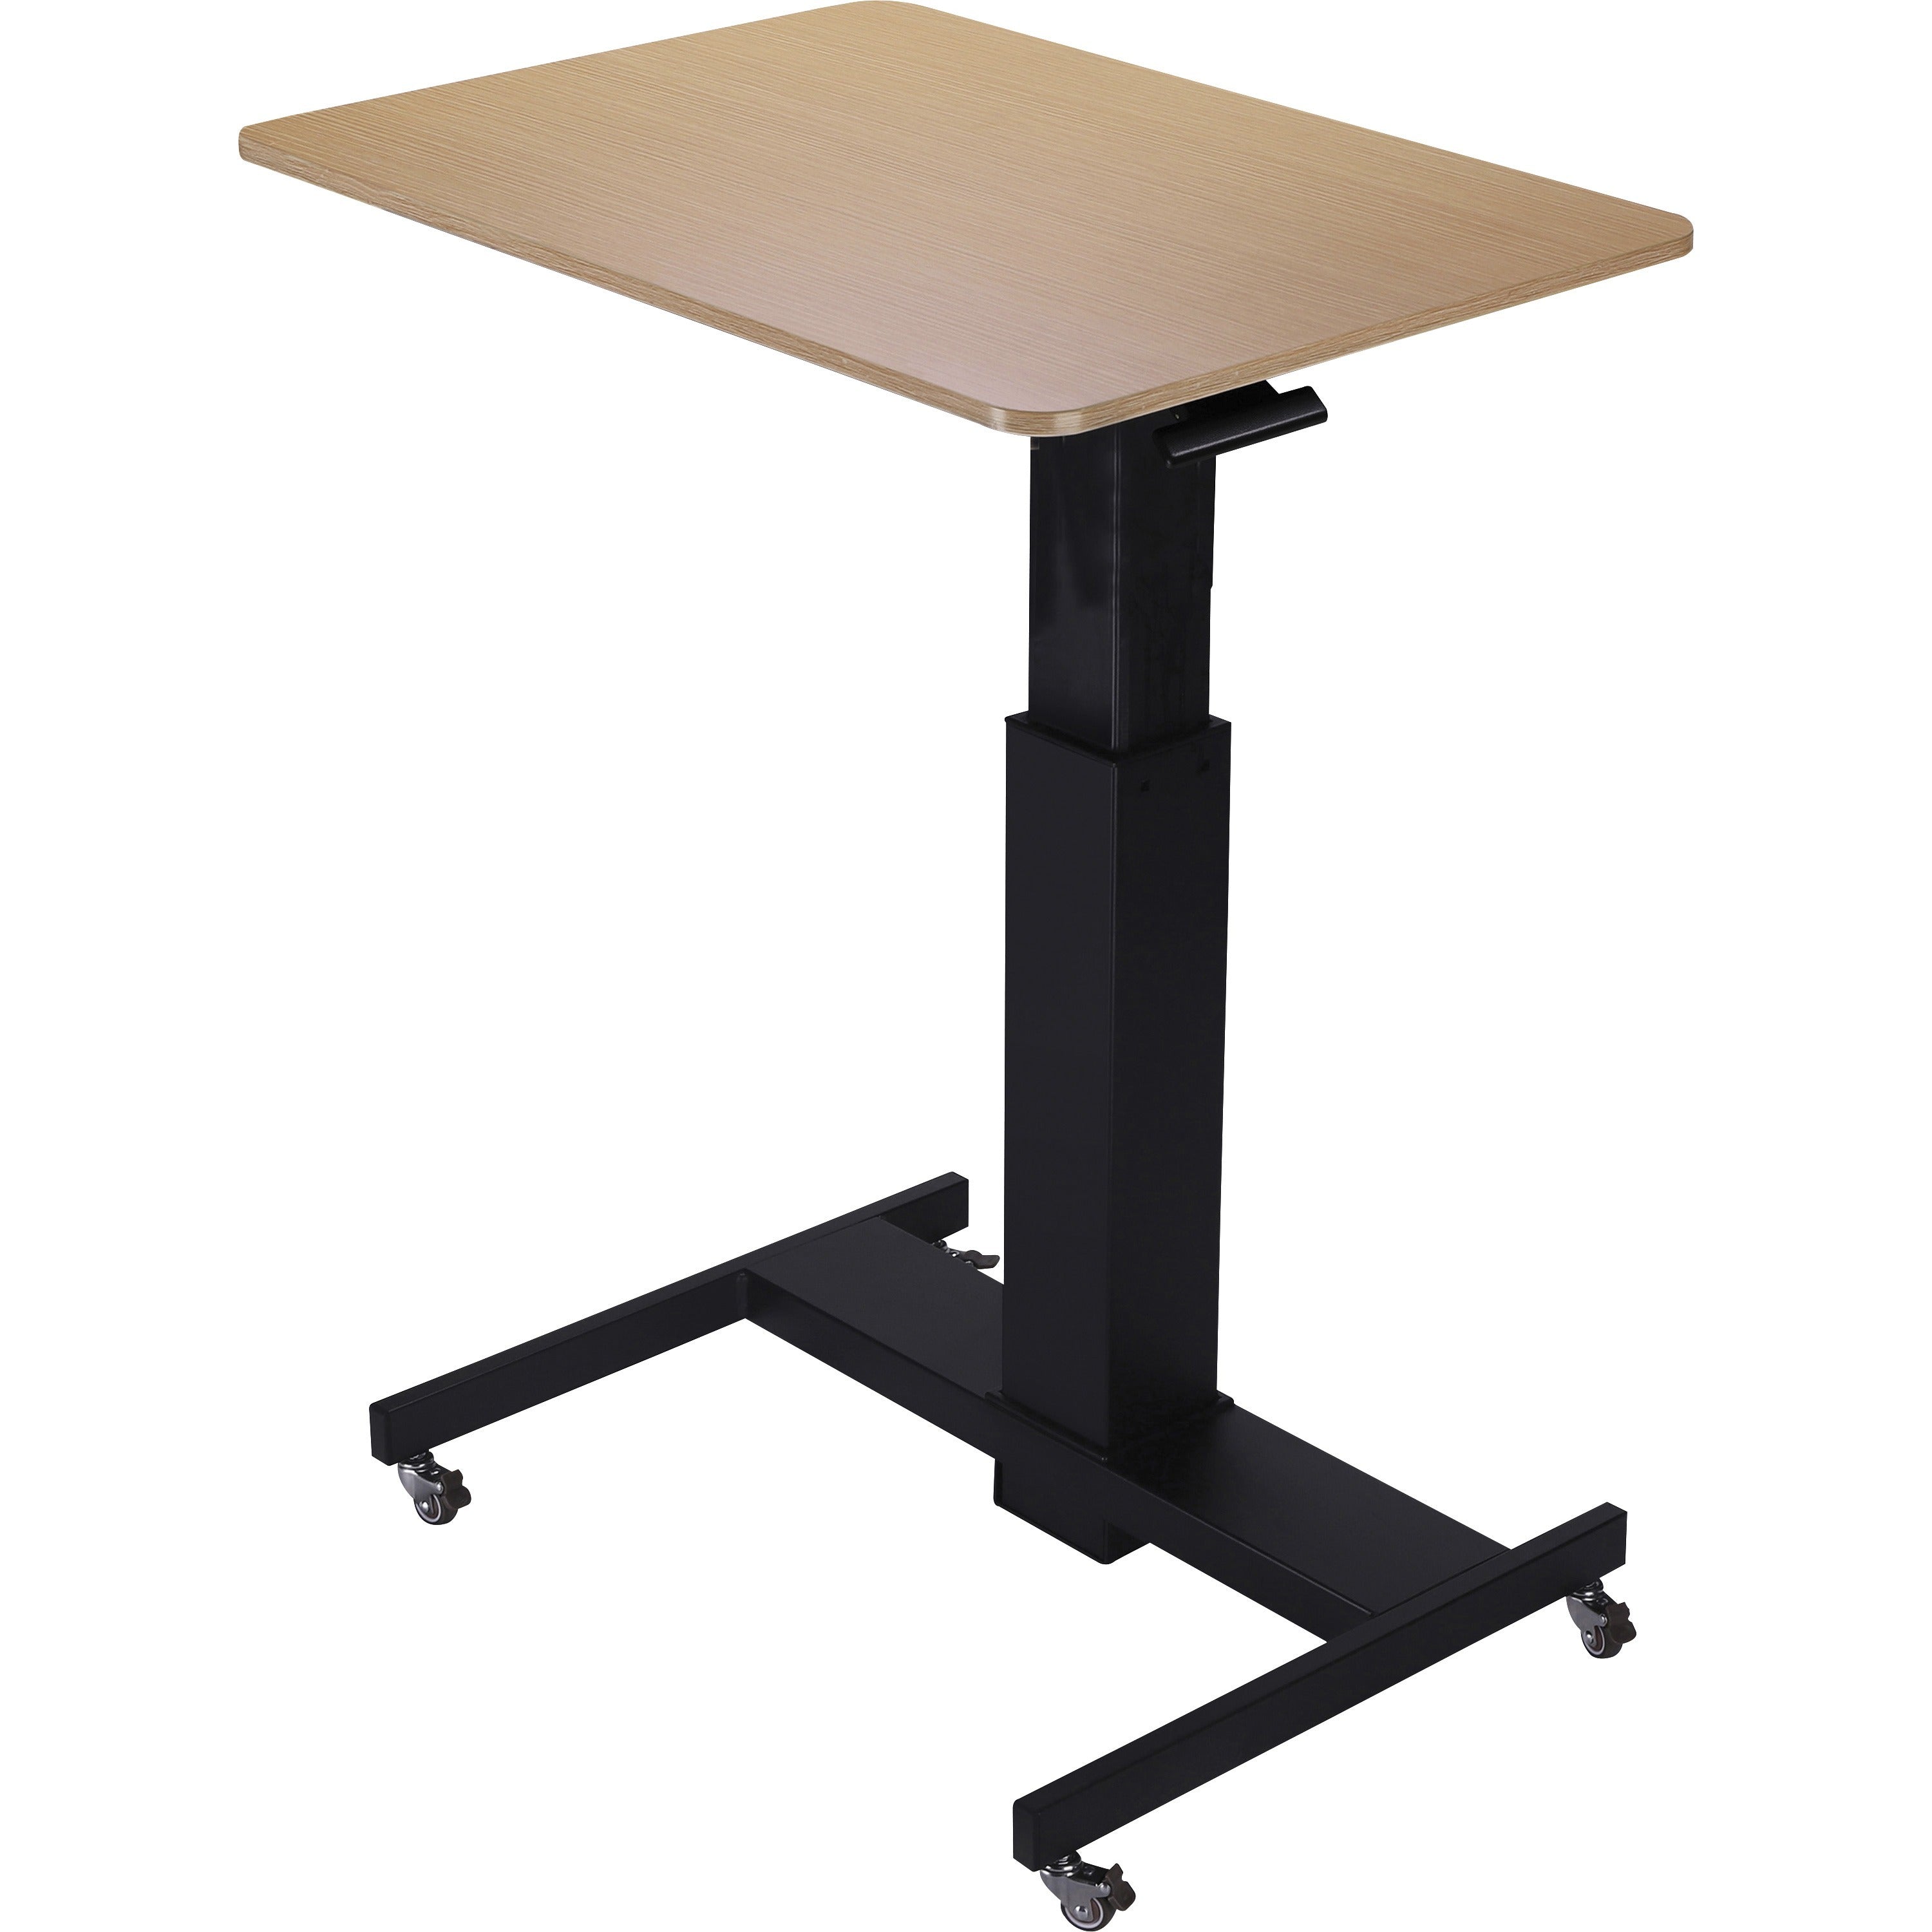 lorell-28-sit-to-stand-school-desk-for-table-topblack-oak-square-top-adjustable-height-24-to-40-adjustment-40-height-x-28-width-x-20-length-assembly-required-1-each_llr00076 - 1